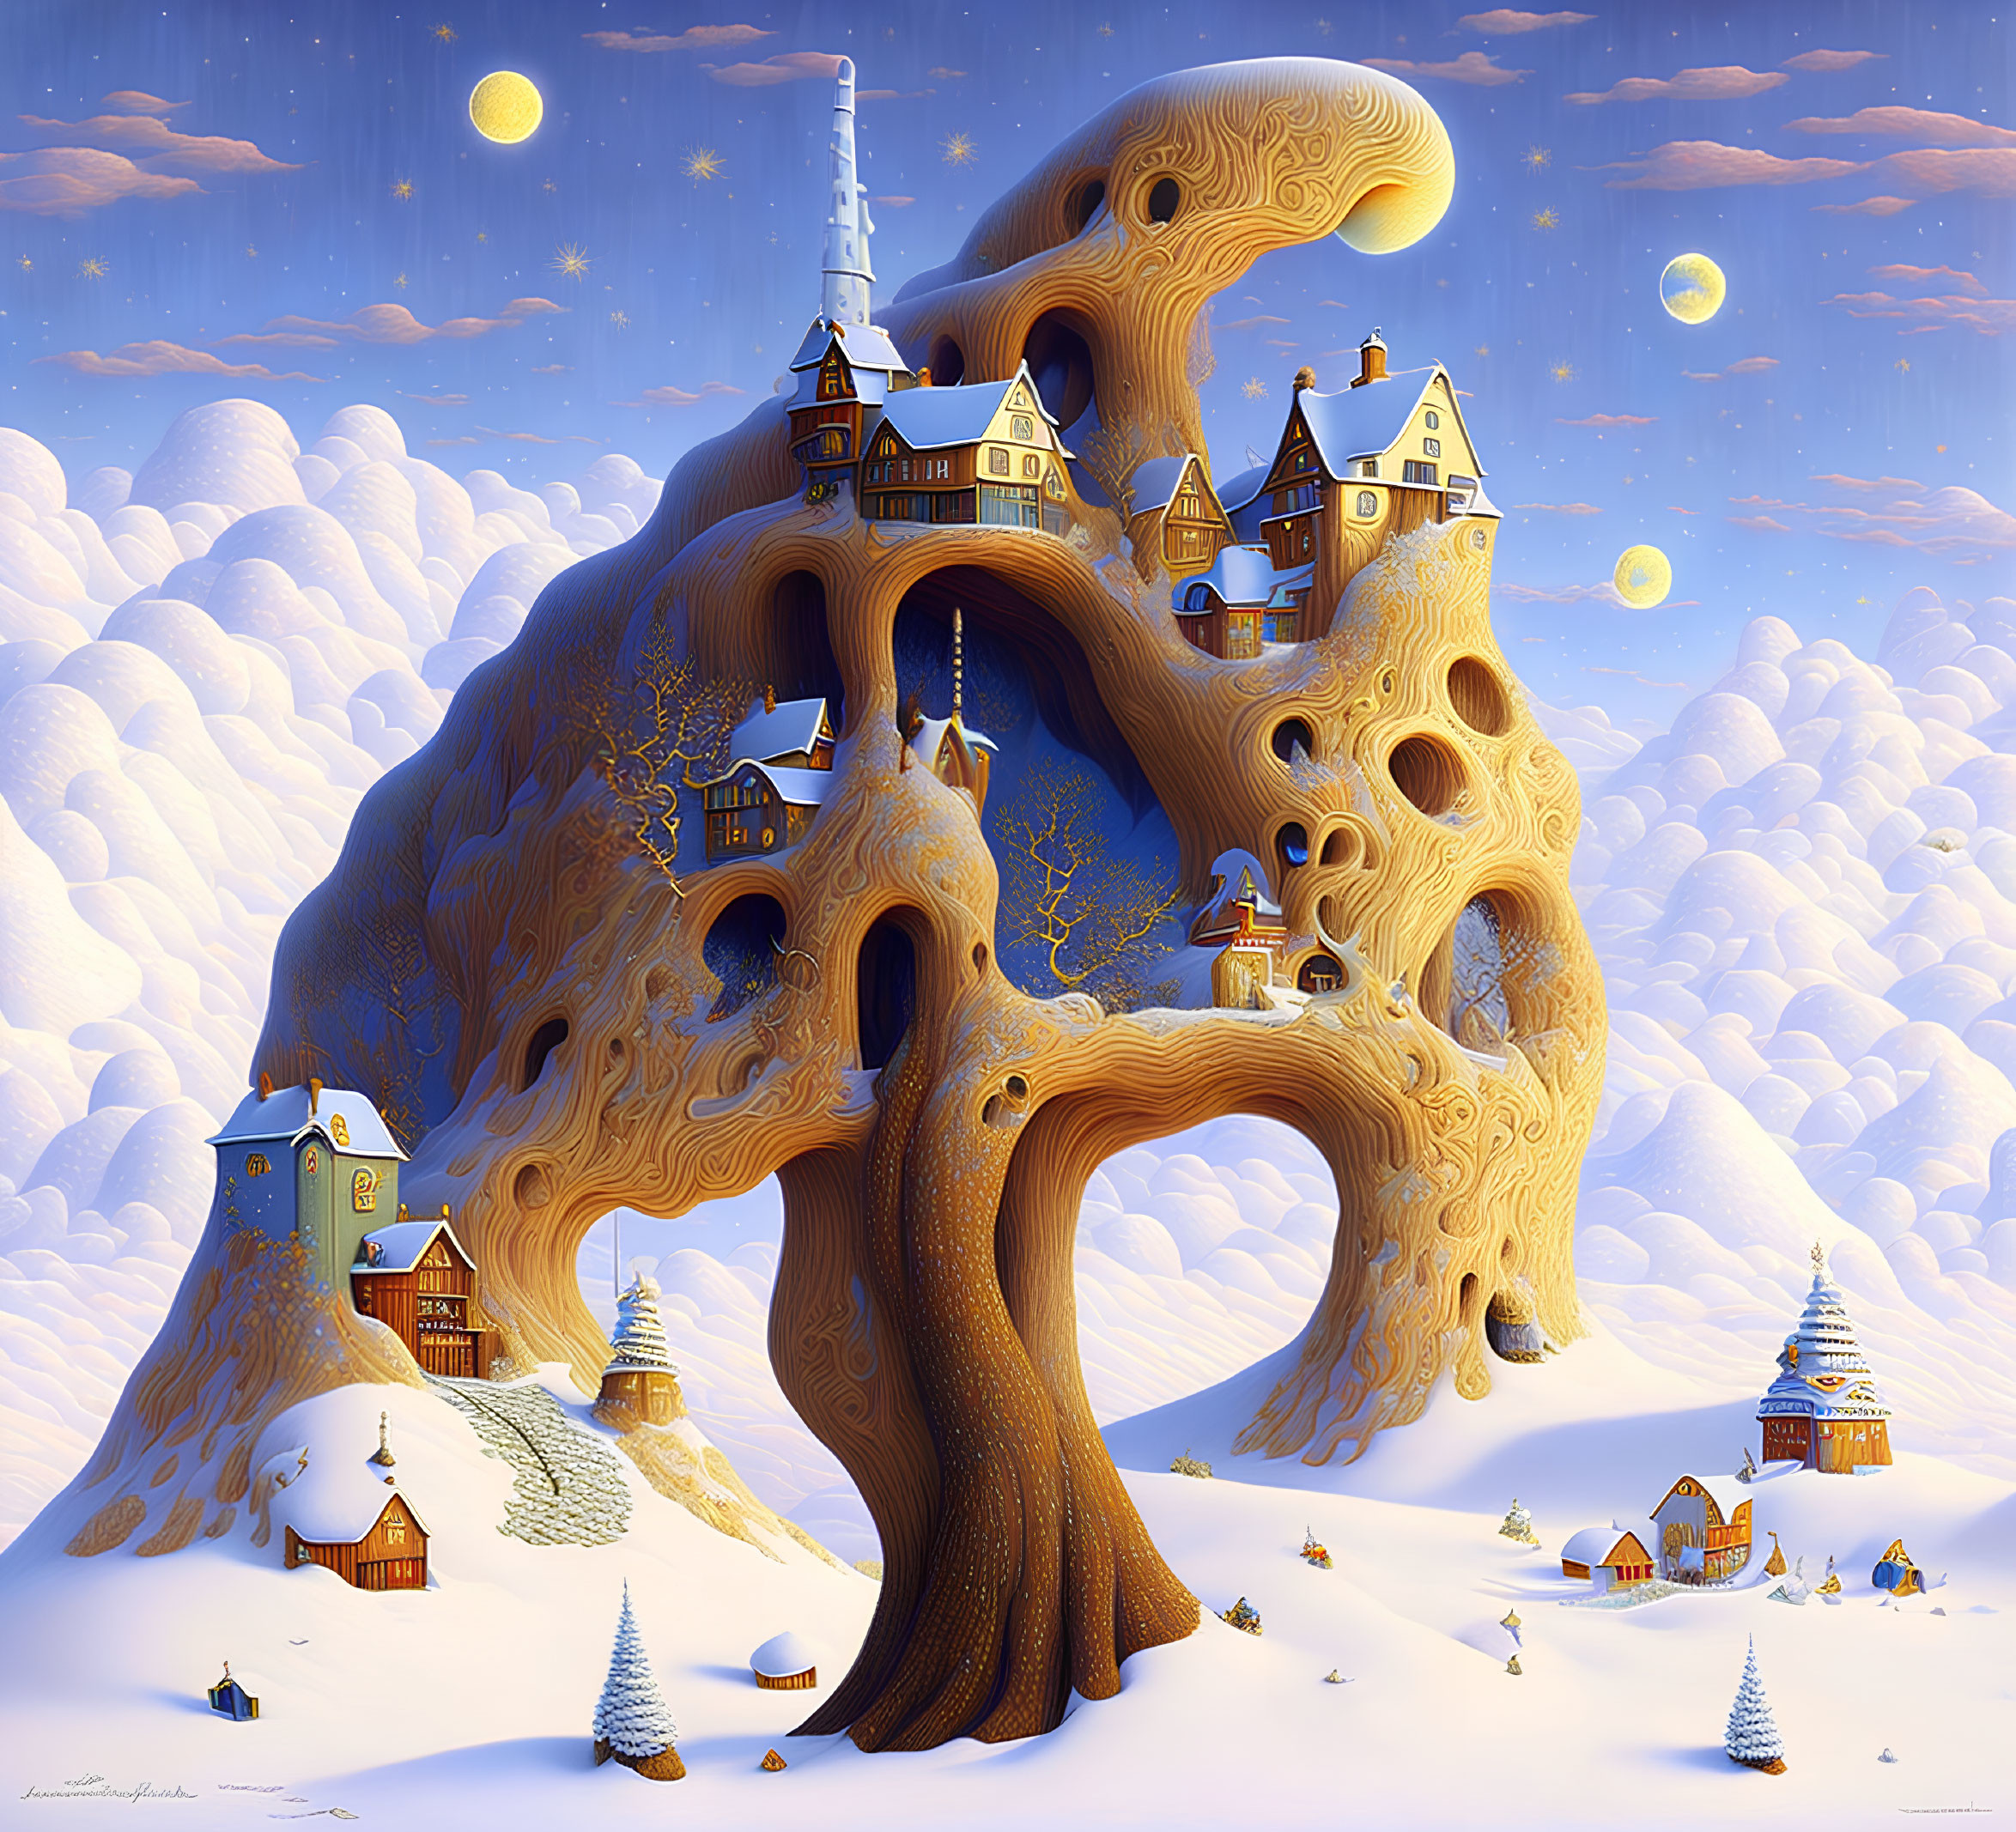 Giant Tree with Houses and Castles in Snowy Landscape